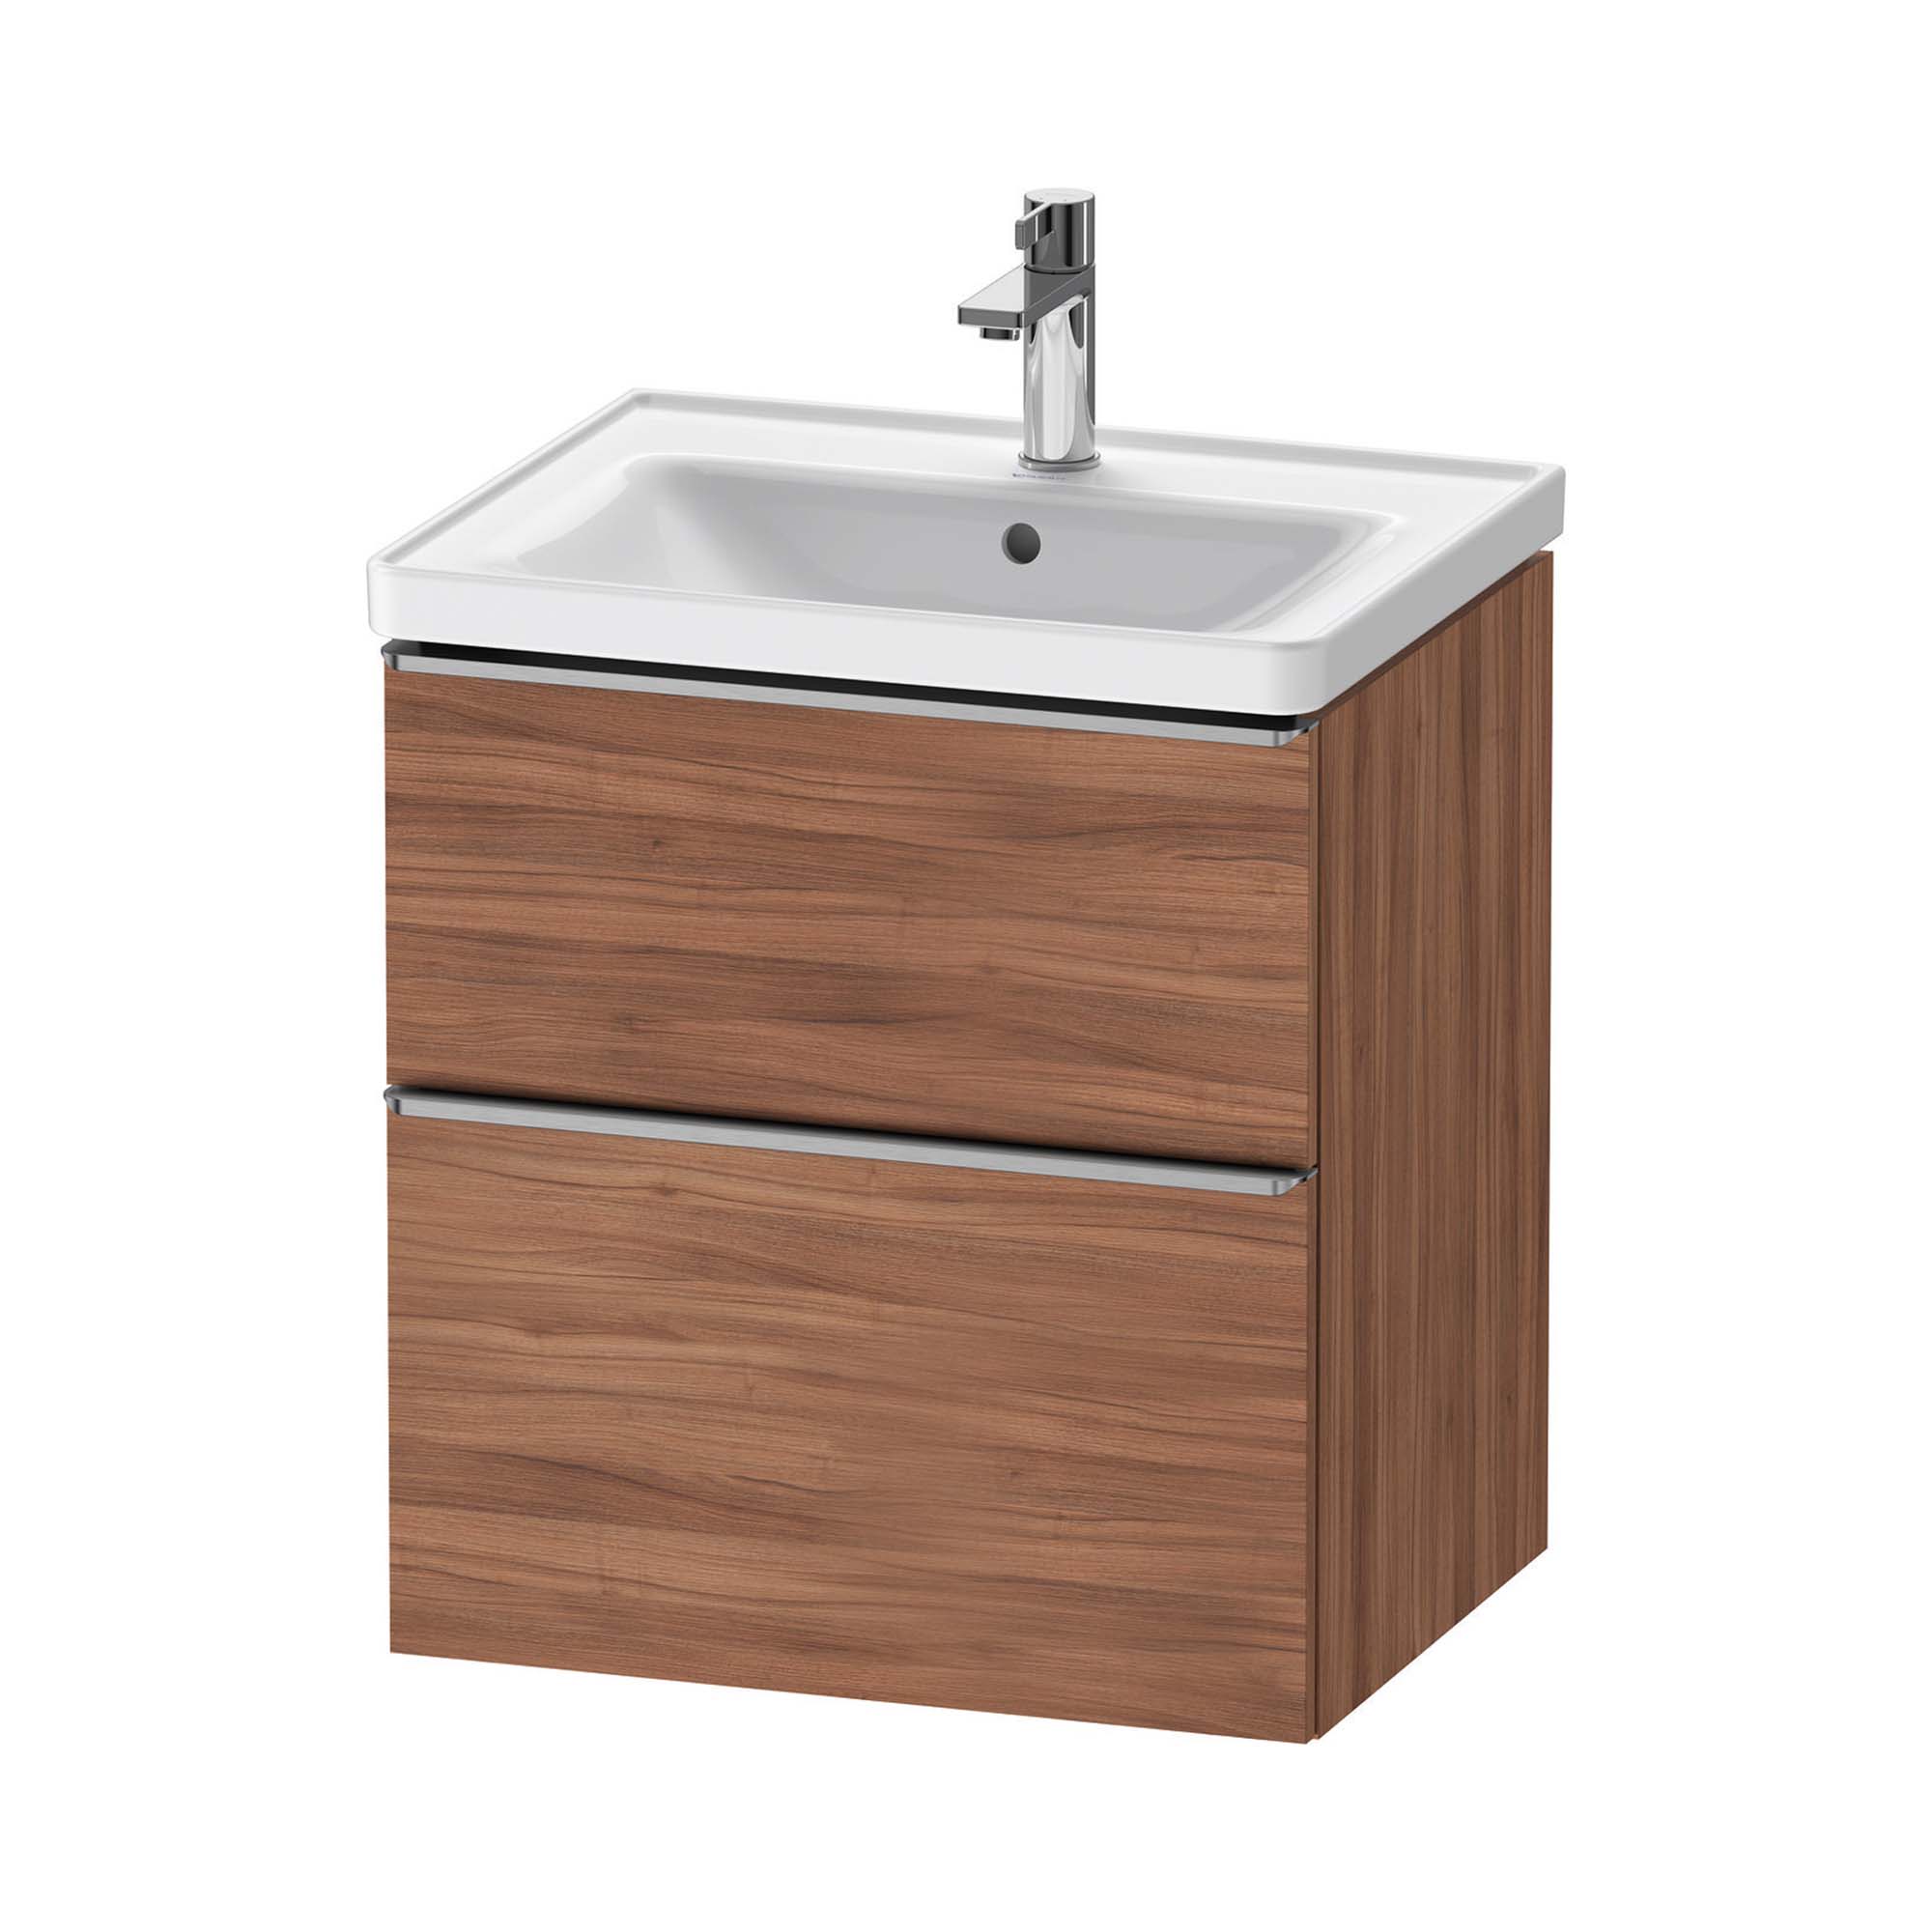 duravit d-neo 600 wall mounted vanity unit with d-neo basin walnut stainless steel handles